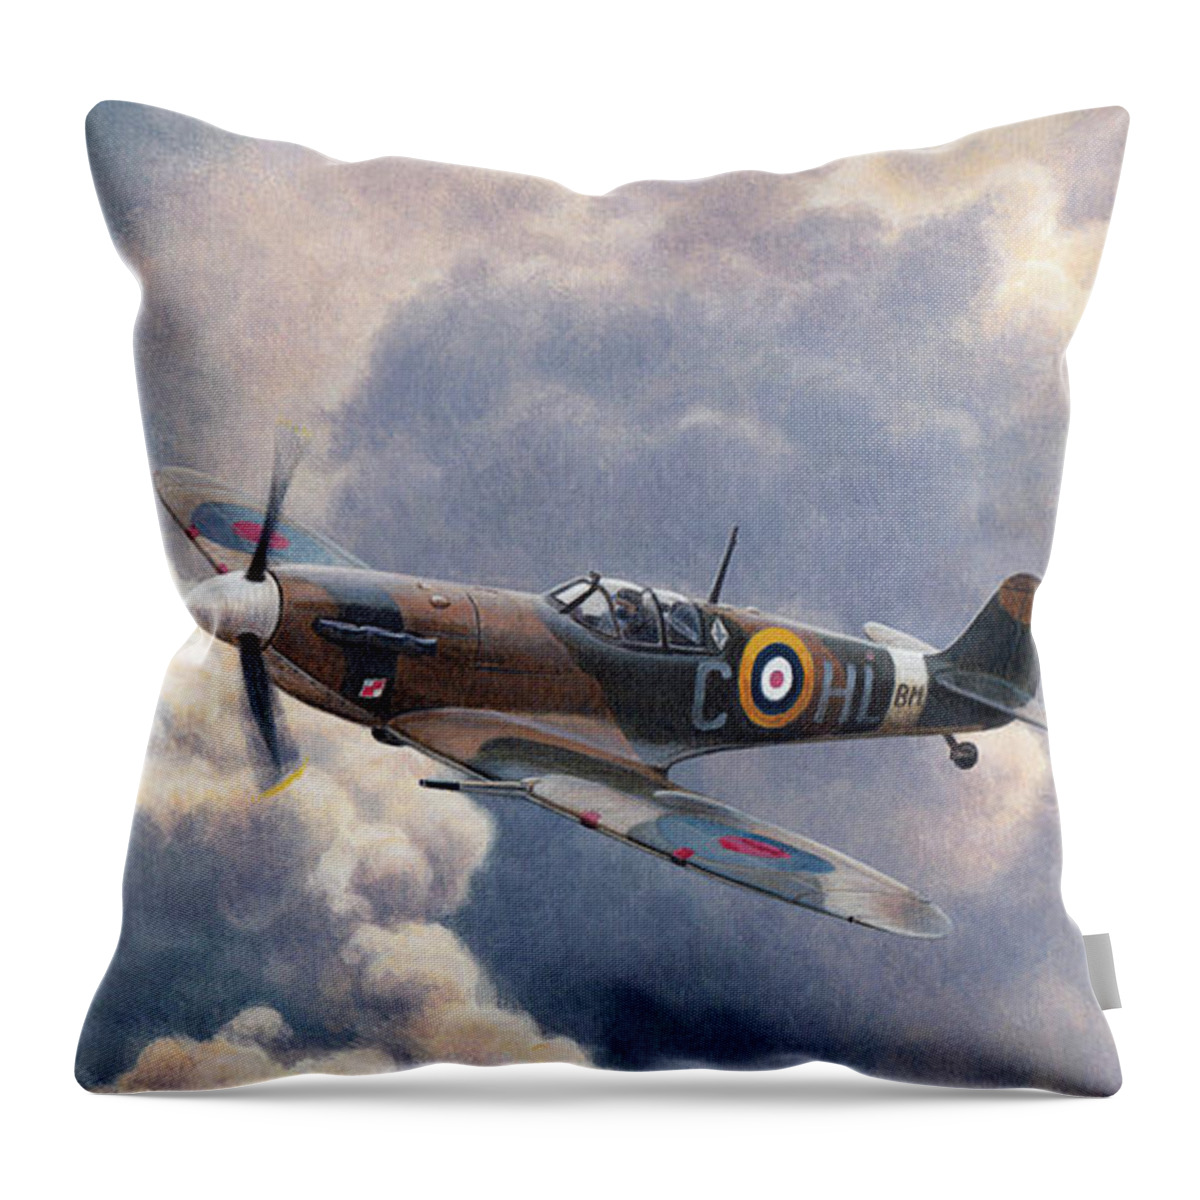 Adult Throw Pillow featuring the photograph Spitfire Plane Flying In Storm Cloud by Ikon Ikon Images